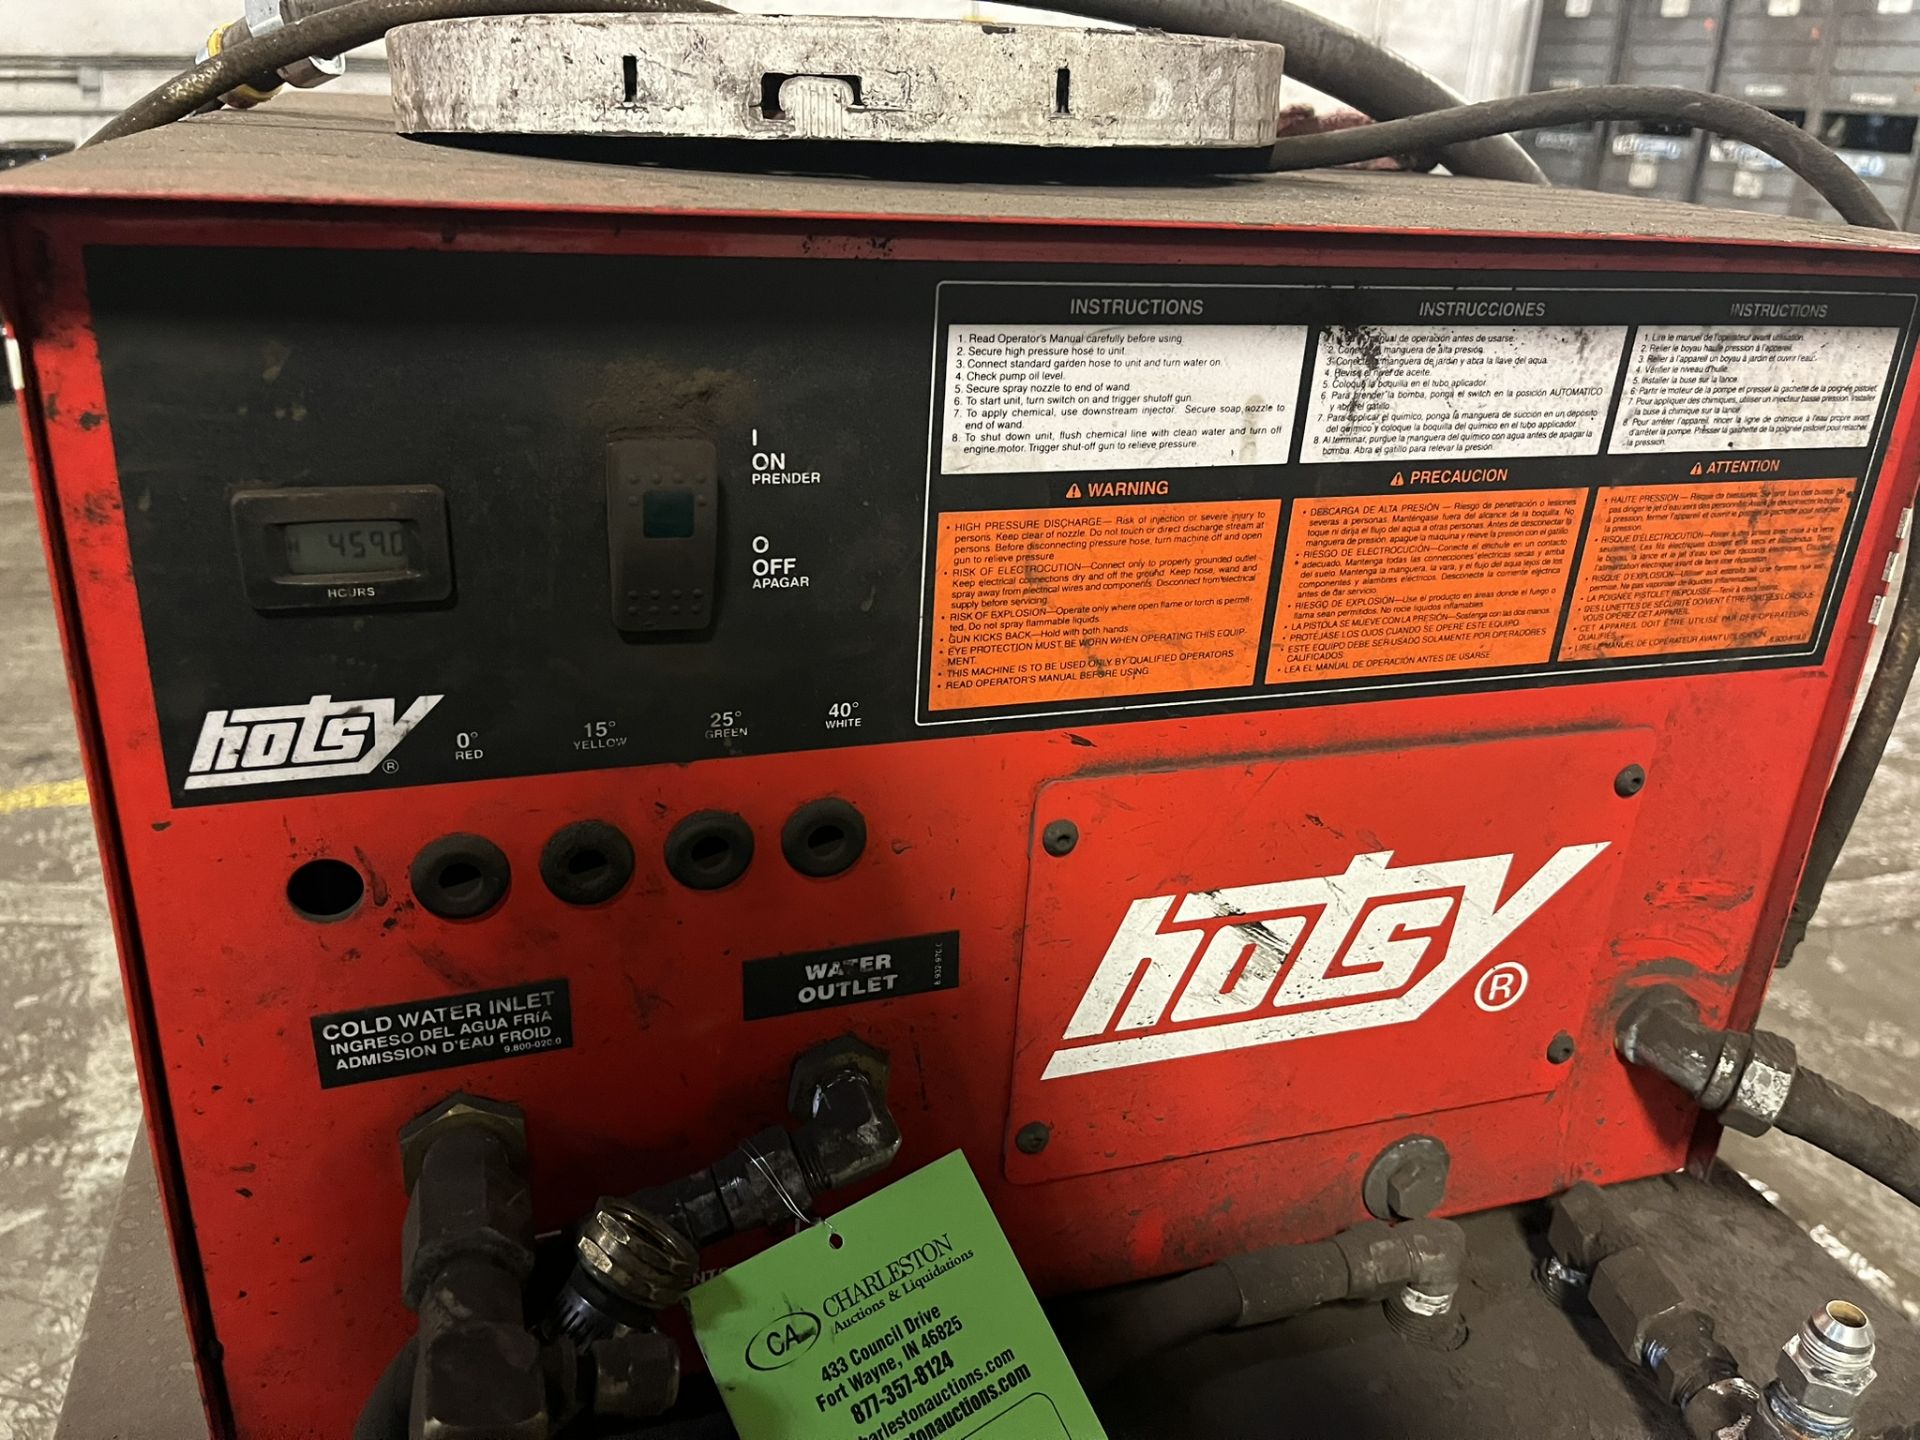 HOTSY HOT WATER PRESSURE WASHER MODEL # HWE-403009C SERIAL # 11096470-101327; 460 V/3/59 A/60 HZ; - Image 10 of 13